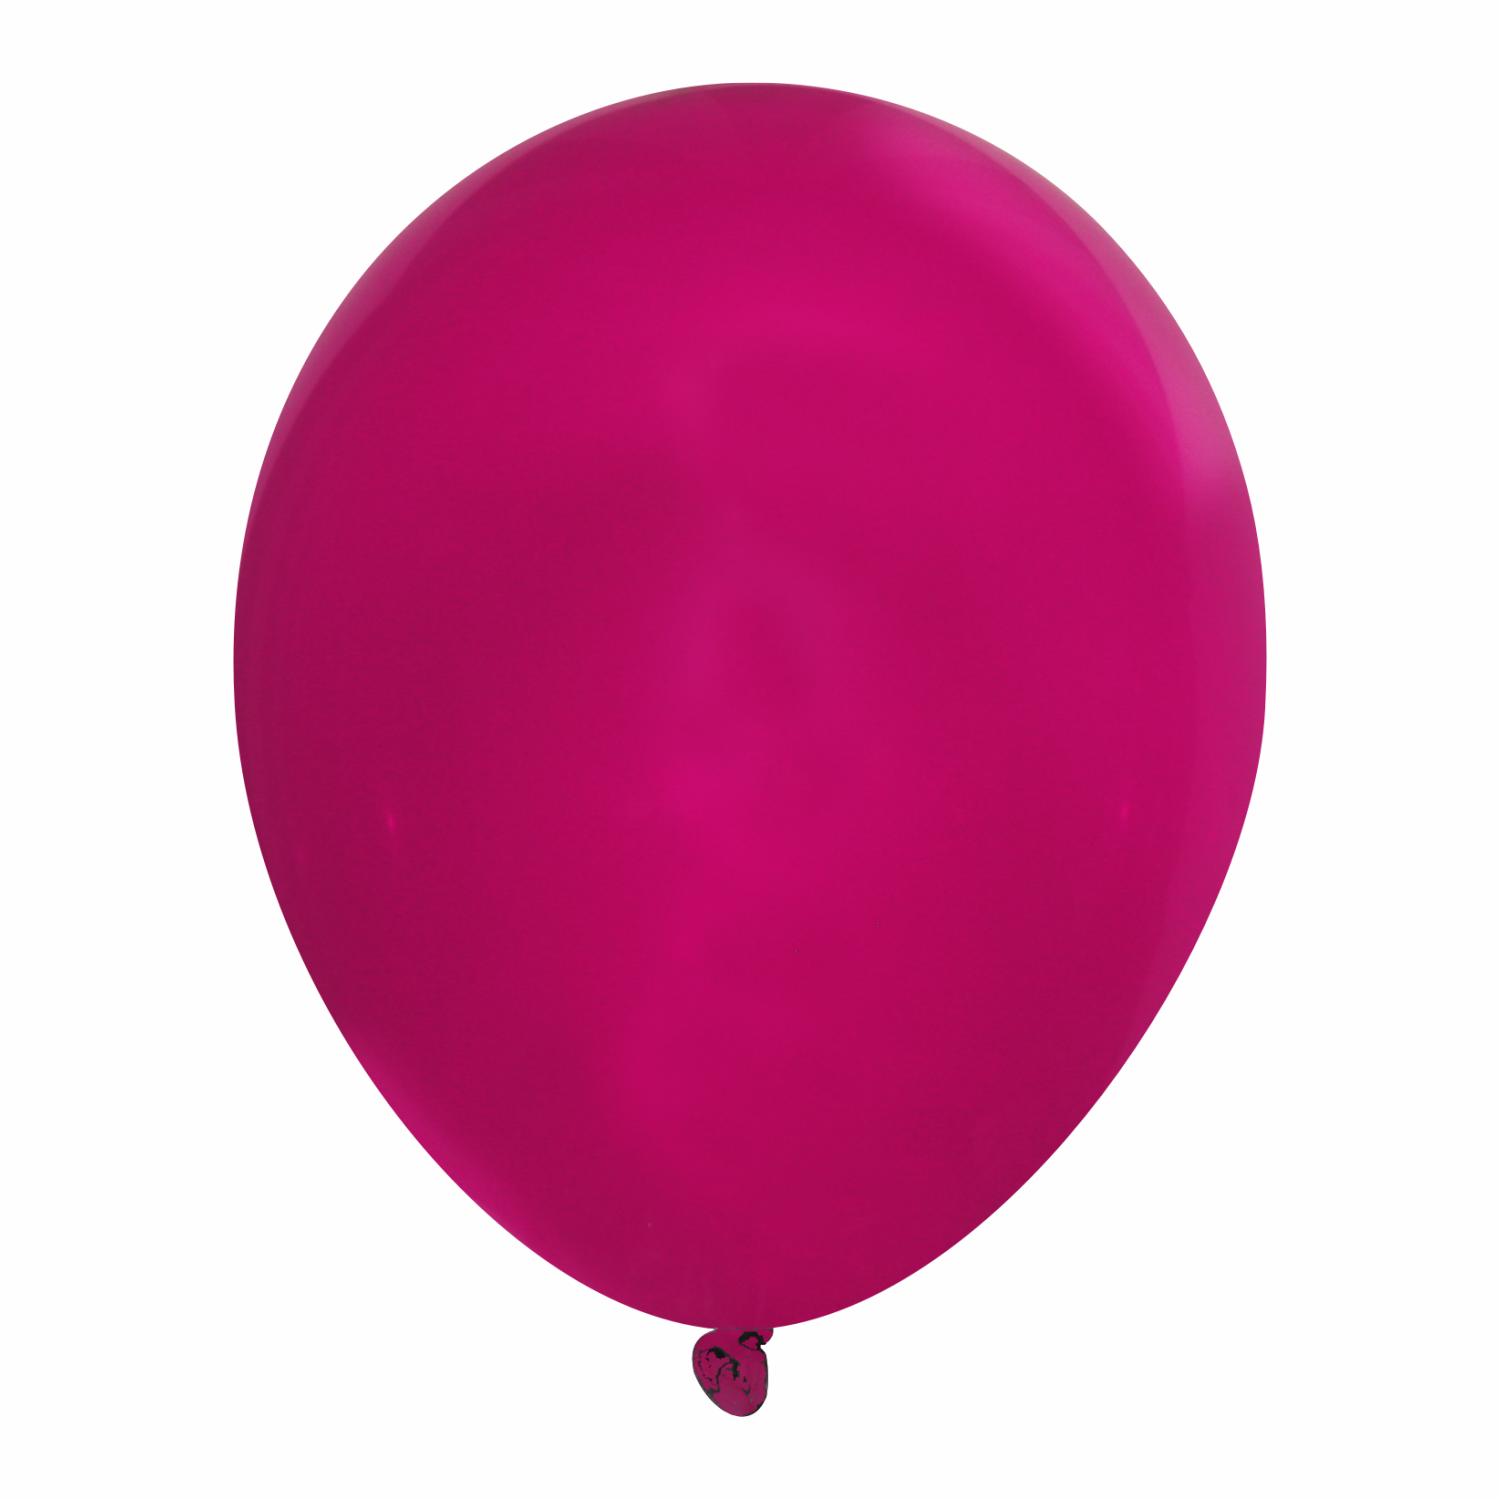 http://images.officebrain.com/migration-api-hidden-new/web/images/626/11wrp-cry-magenta-pink.png